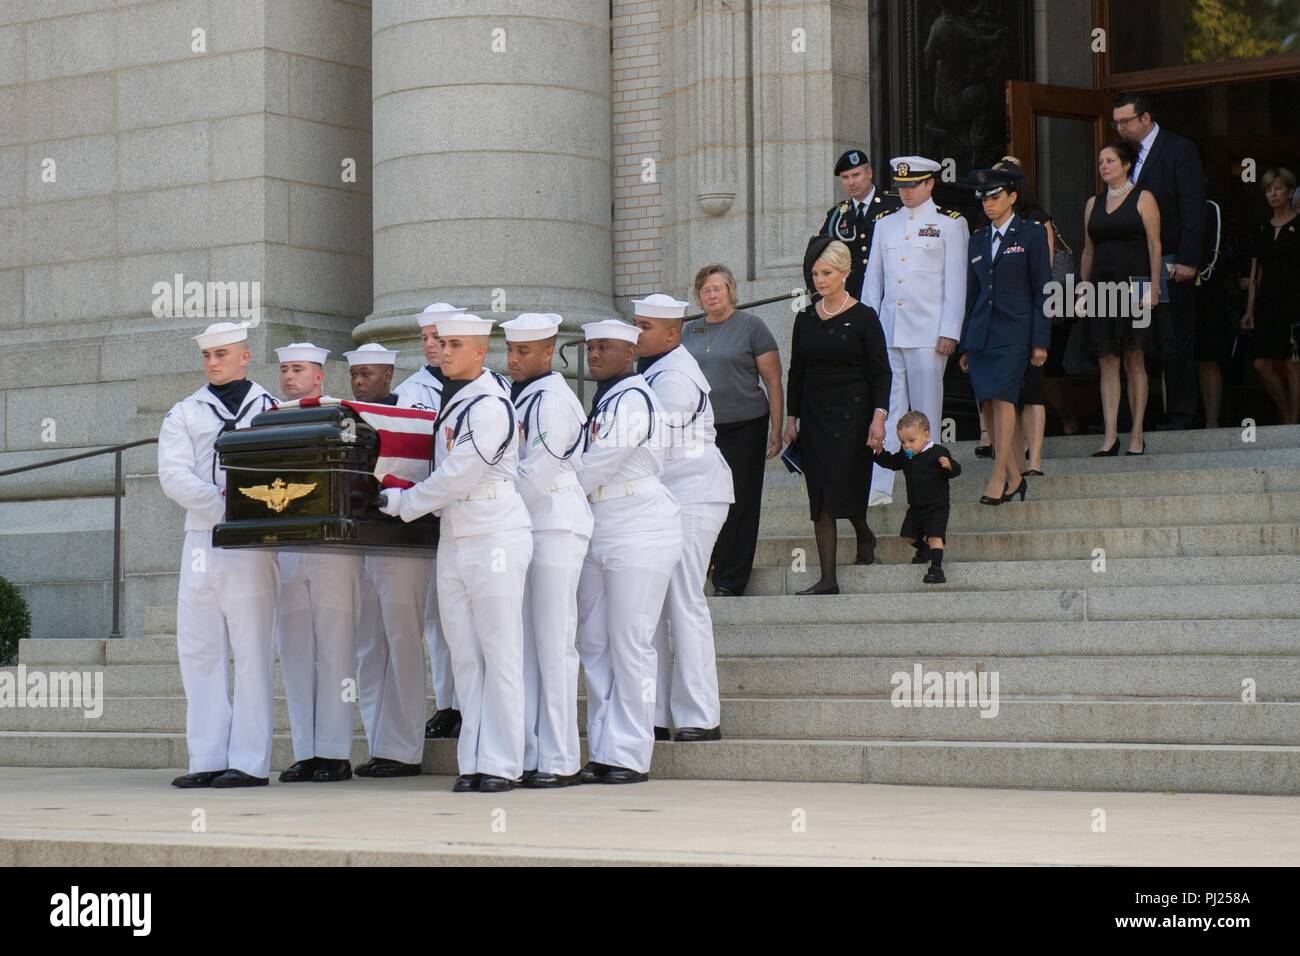 The flag draped casket of Sen. John McCain is carried by Midshipmen to a horse-drawn caisson for the procession to the United States Naval Academy Cemetery for his burial service September 2, 2018 in Annapolis, Maryland. John S. McCain, III graduated from the United States Naval Academy in 1958. He was a pilot in the United States Navy, a prisoner of war in Vietnam, a Congressmen and Senator and twice presidential candidate. He received numerous awards, including the Silver Star, Legion of Merit, Purple Heart, and Distinguished Flying Cross. Stock Photo